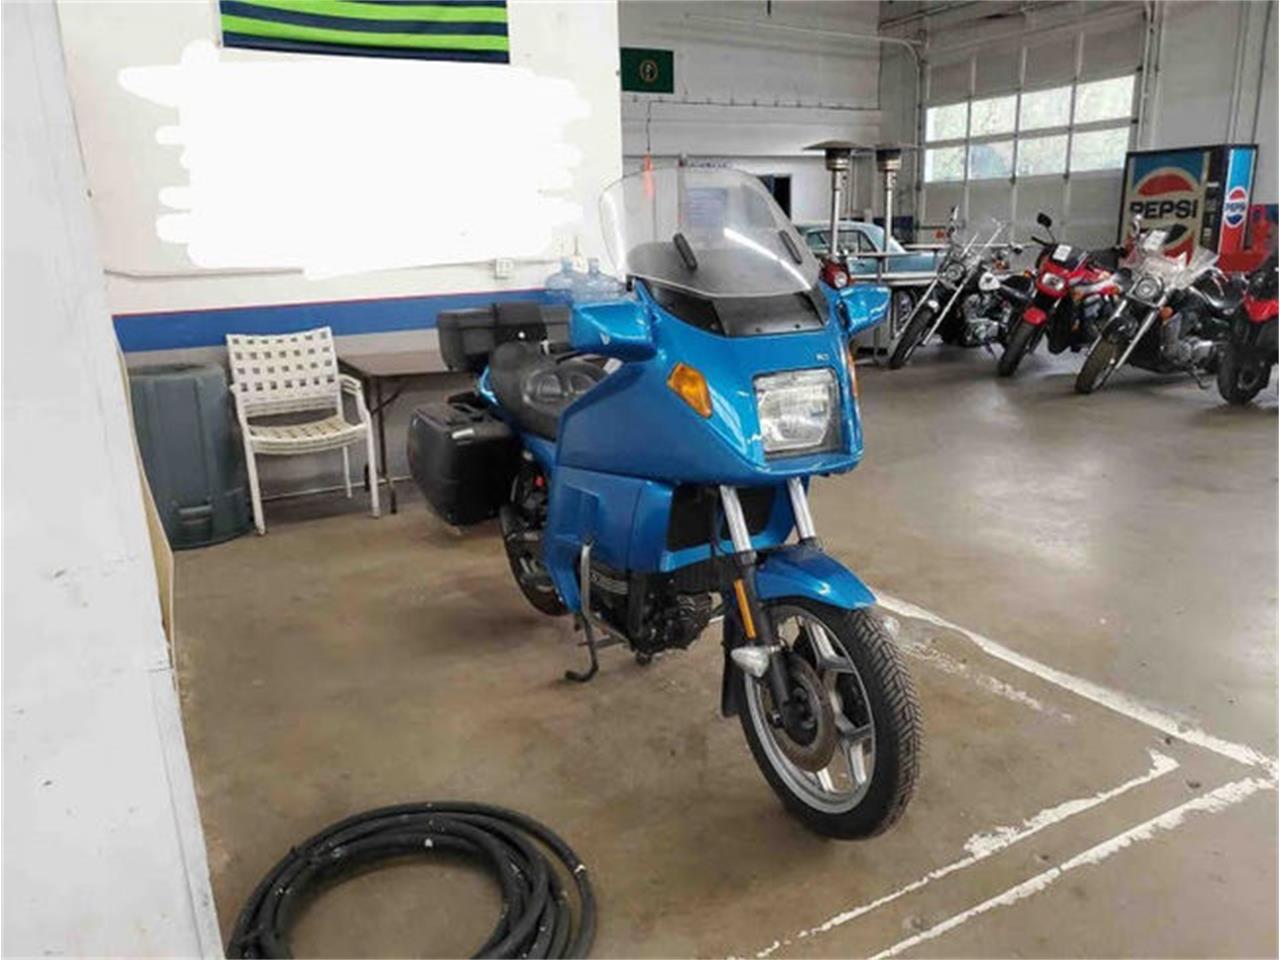 1993 BMW Motorcycle for Sale | ClassicCars.com | CC-1626054